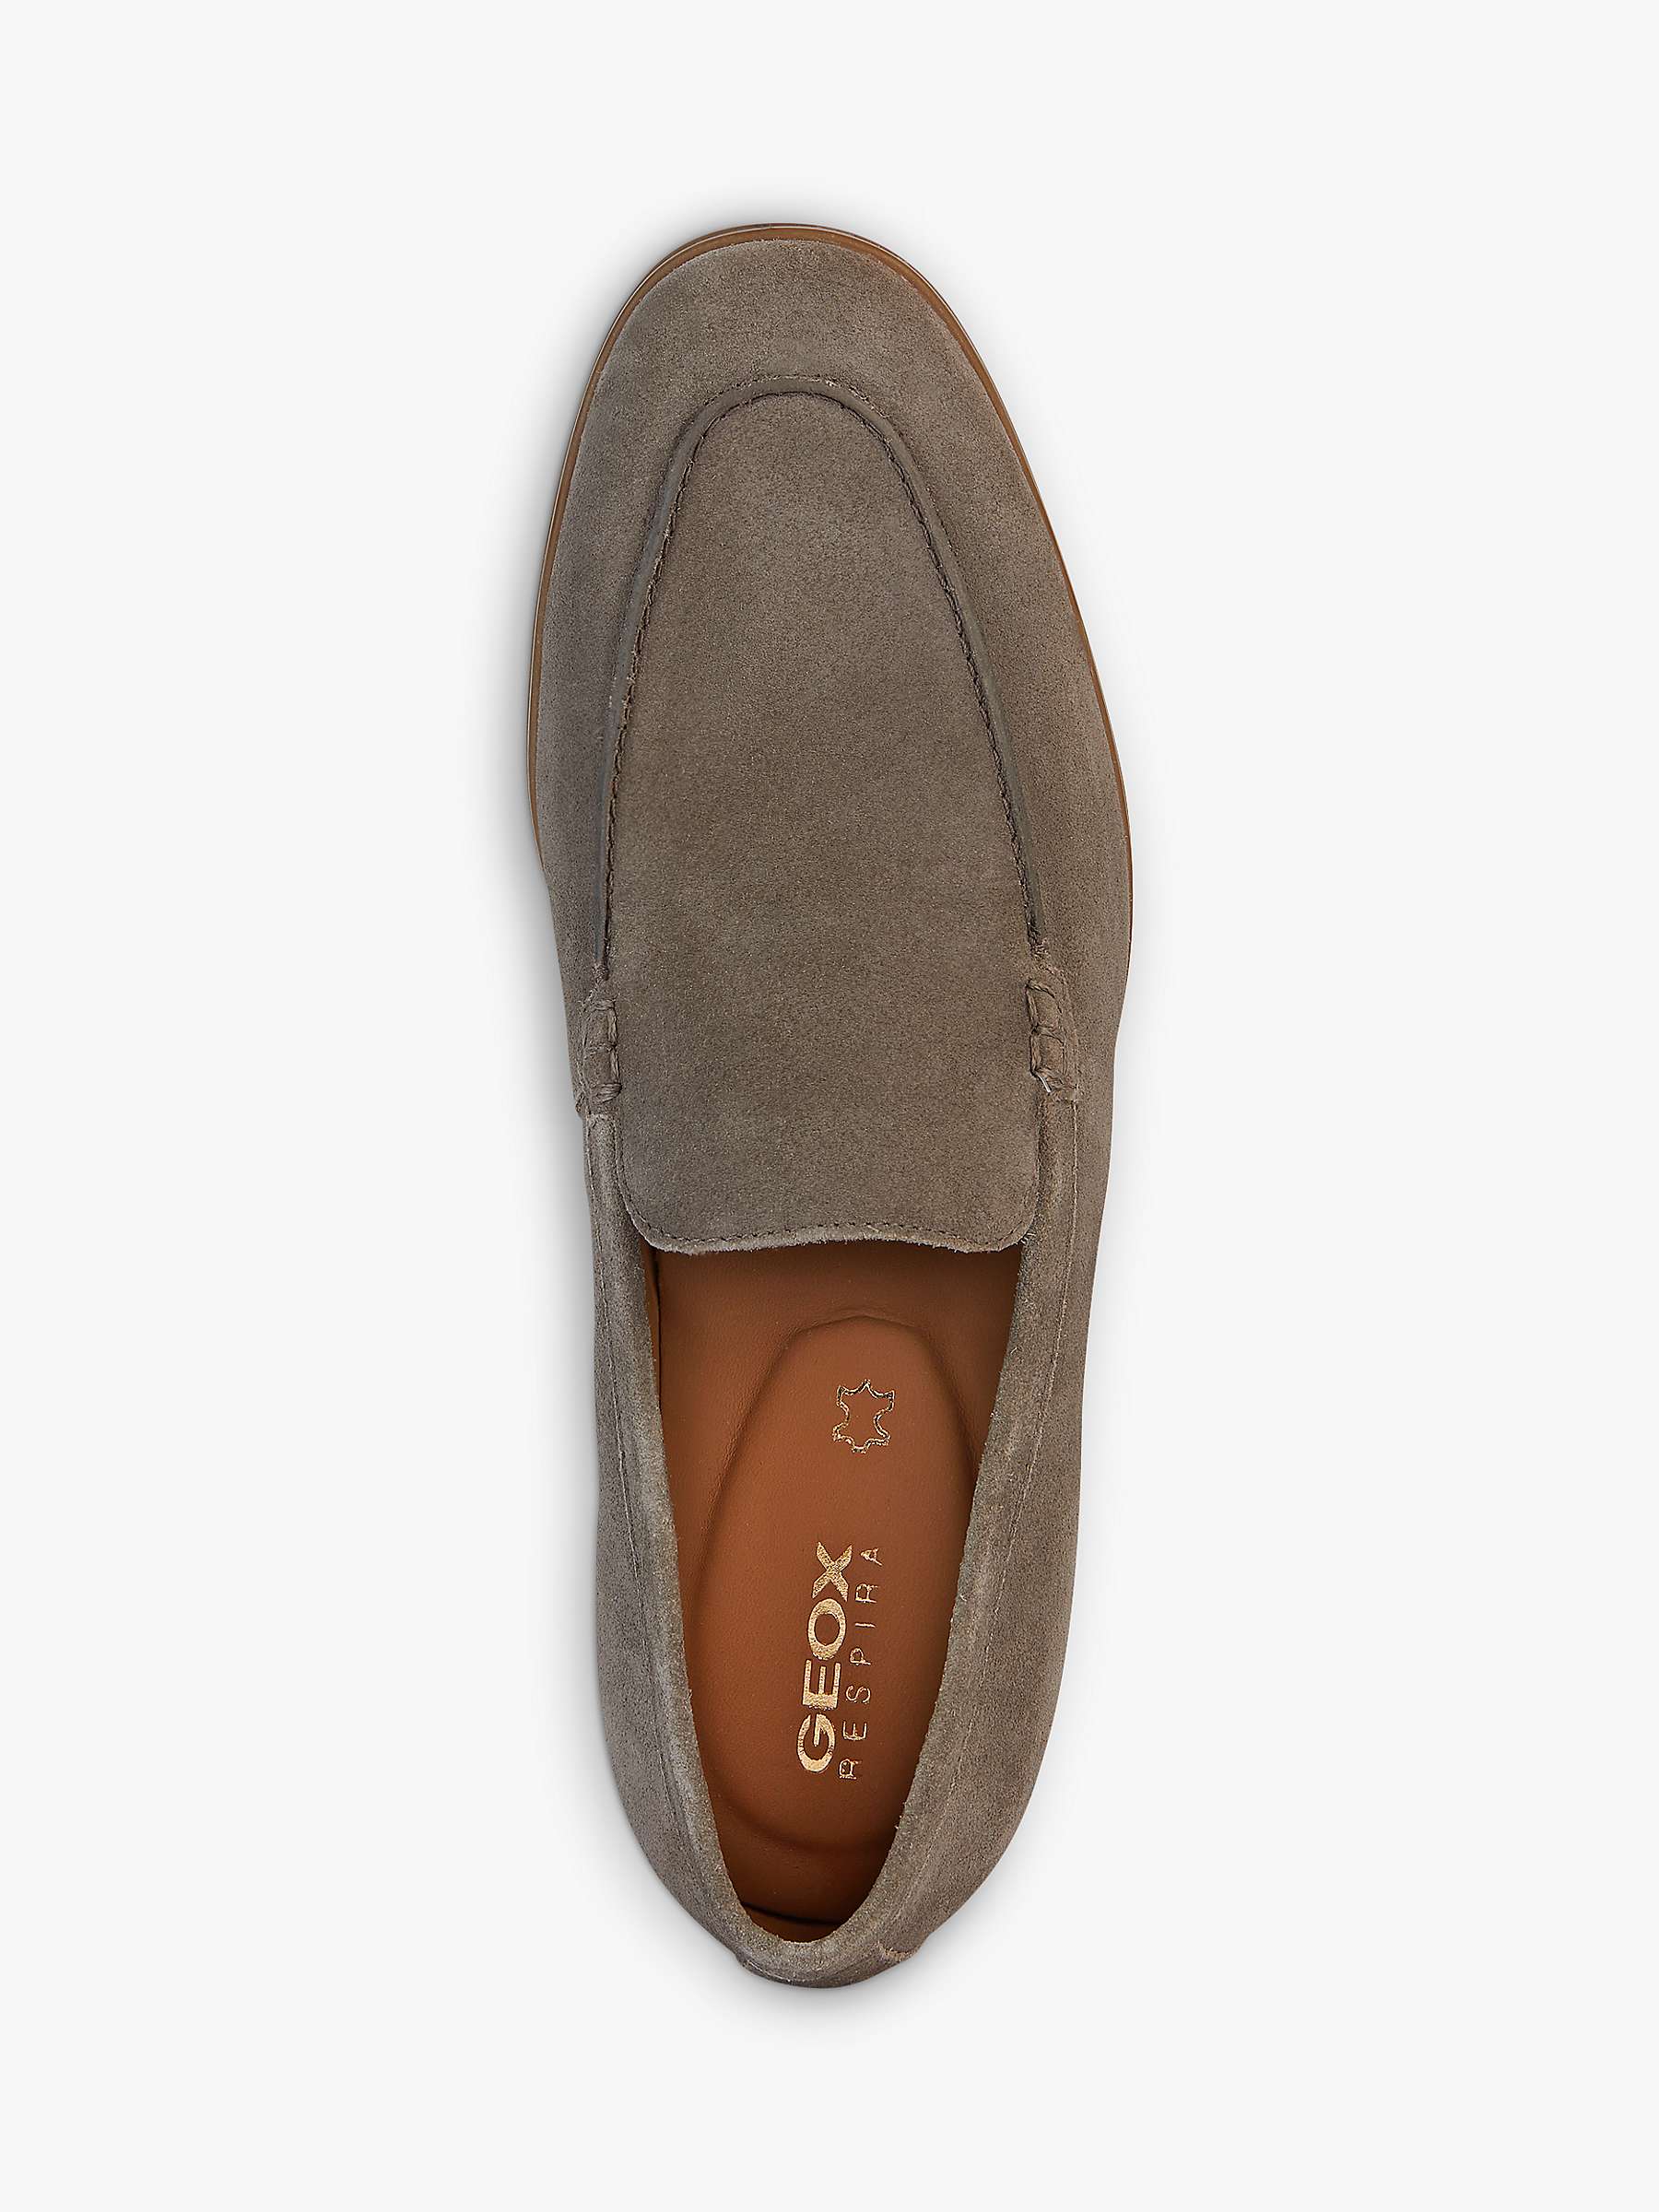 Buy Geox Venzone Loafers Online at johnlewis.com